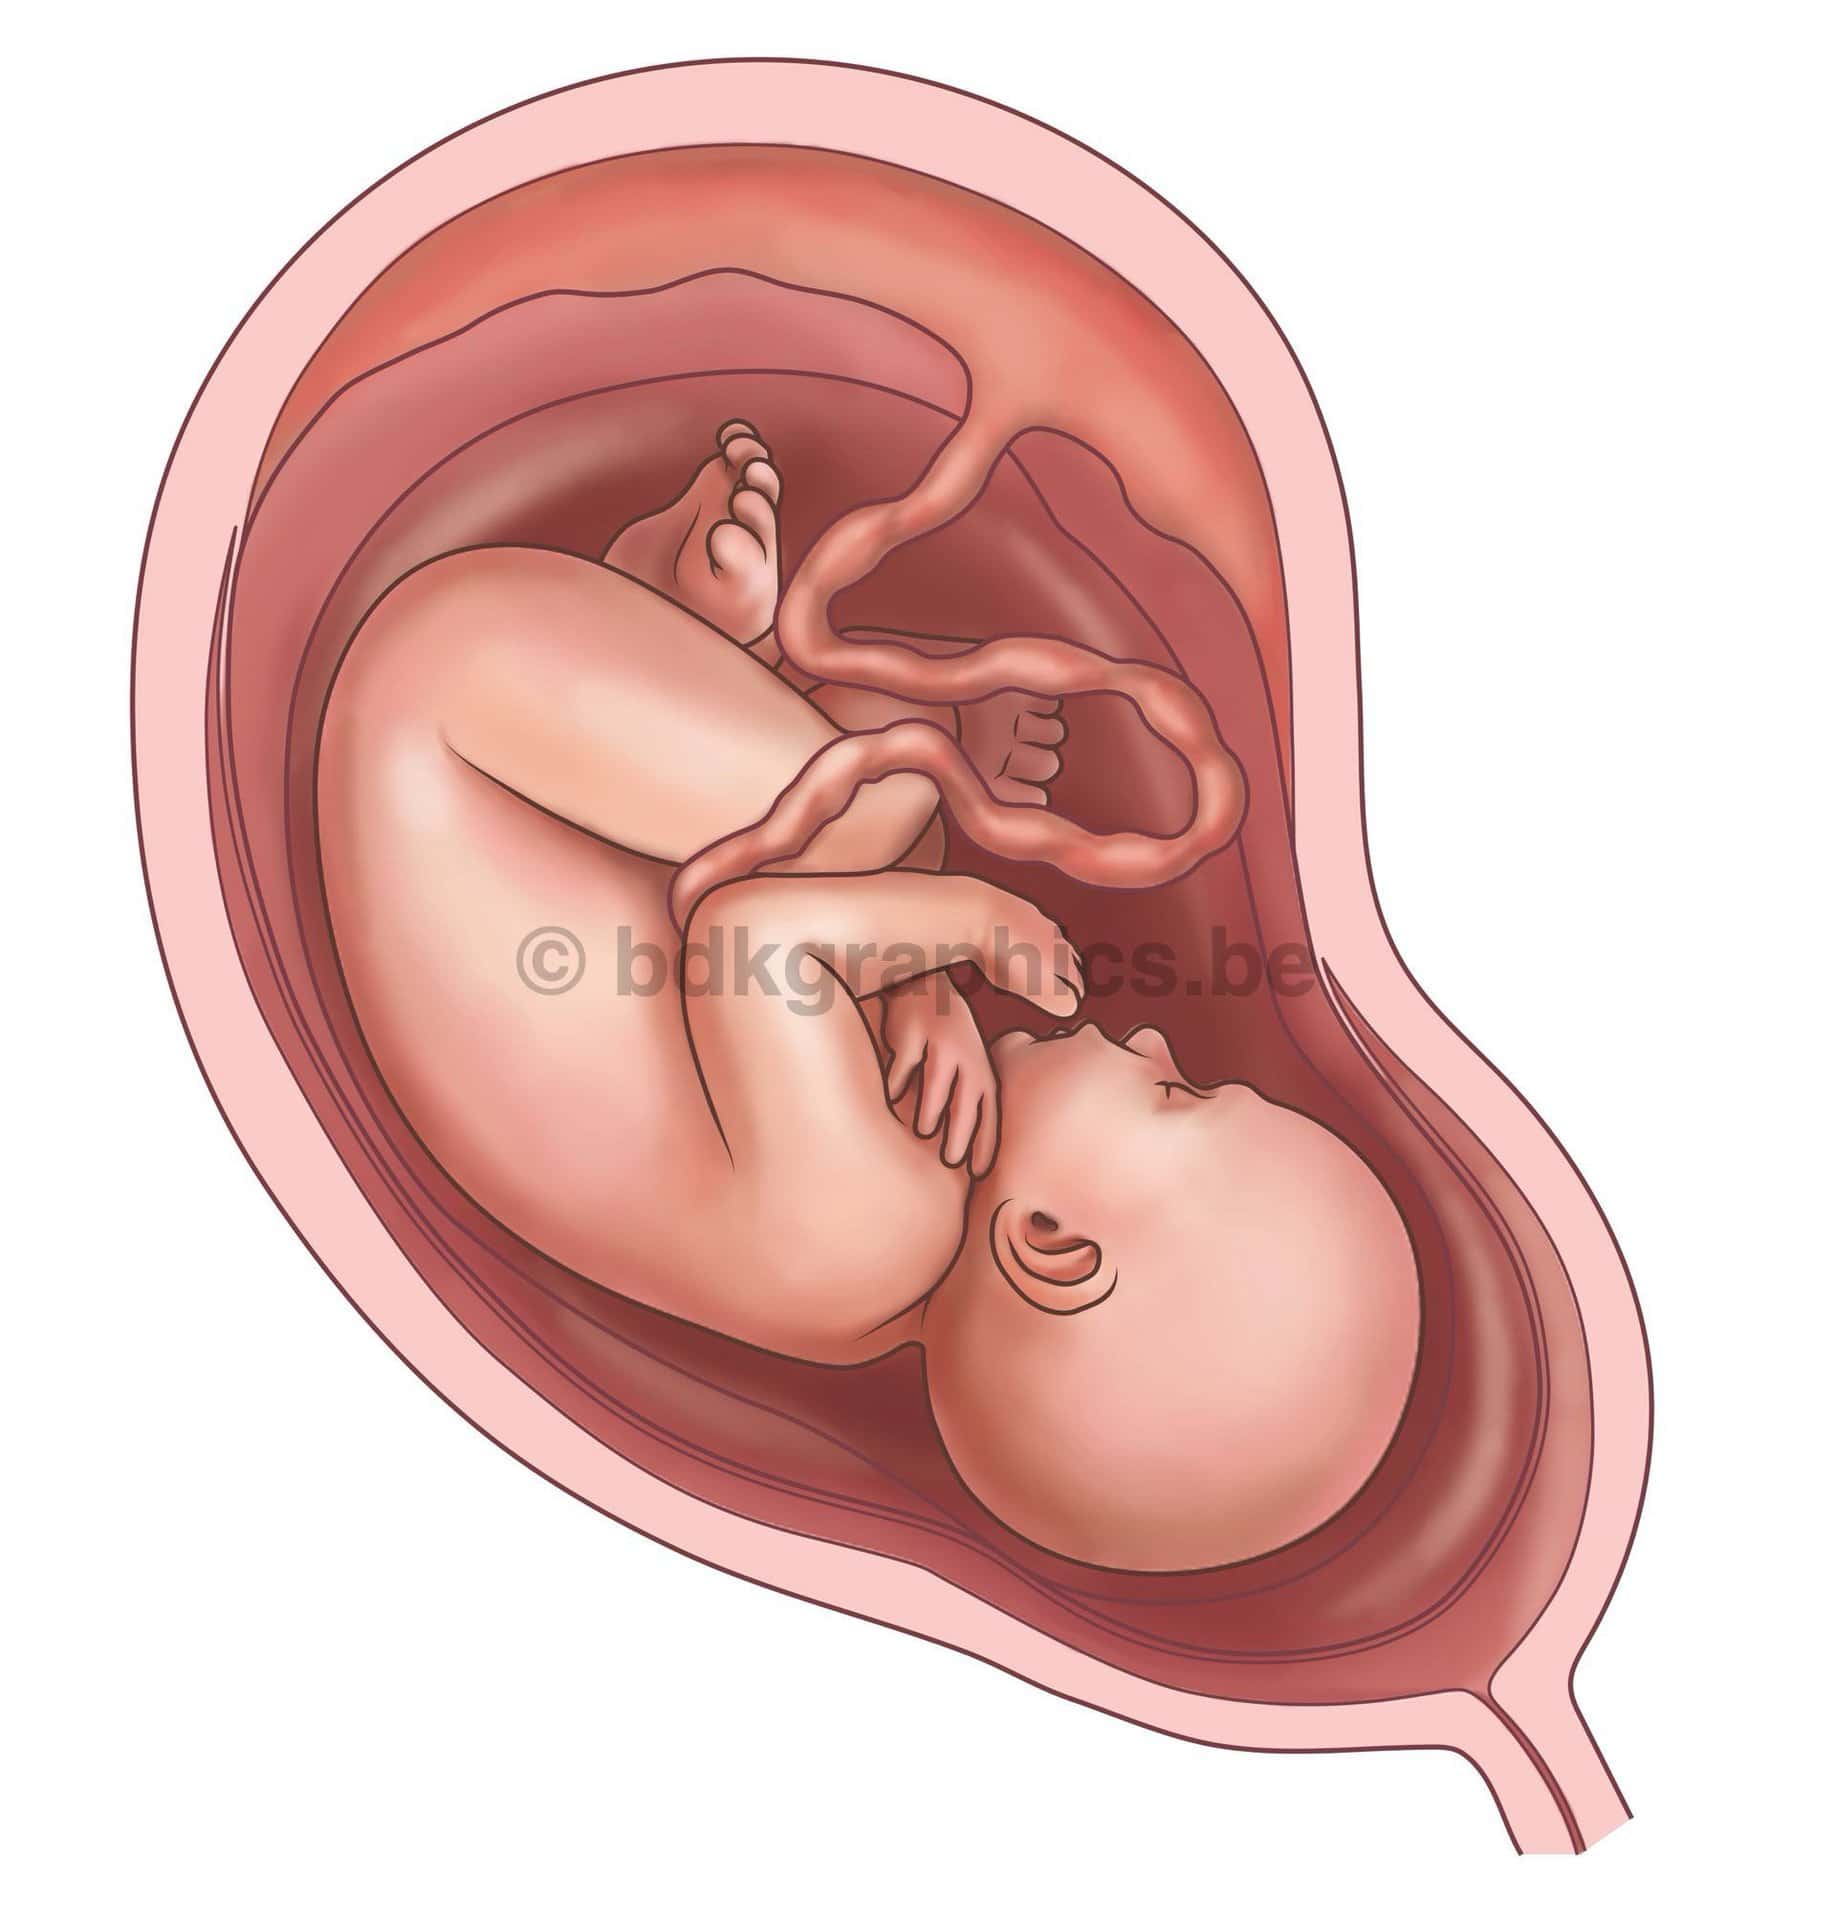 A fetus in the womb.